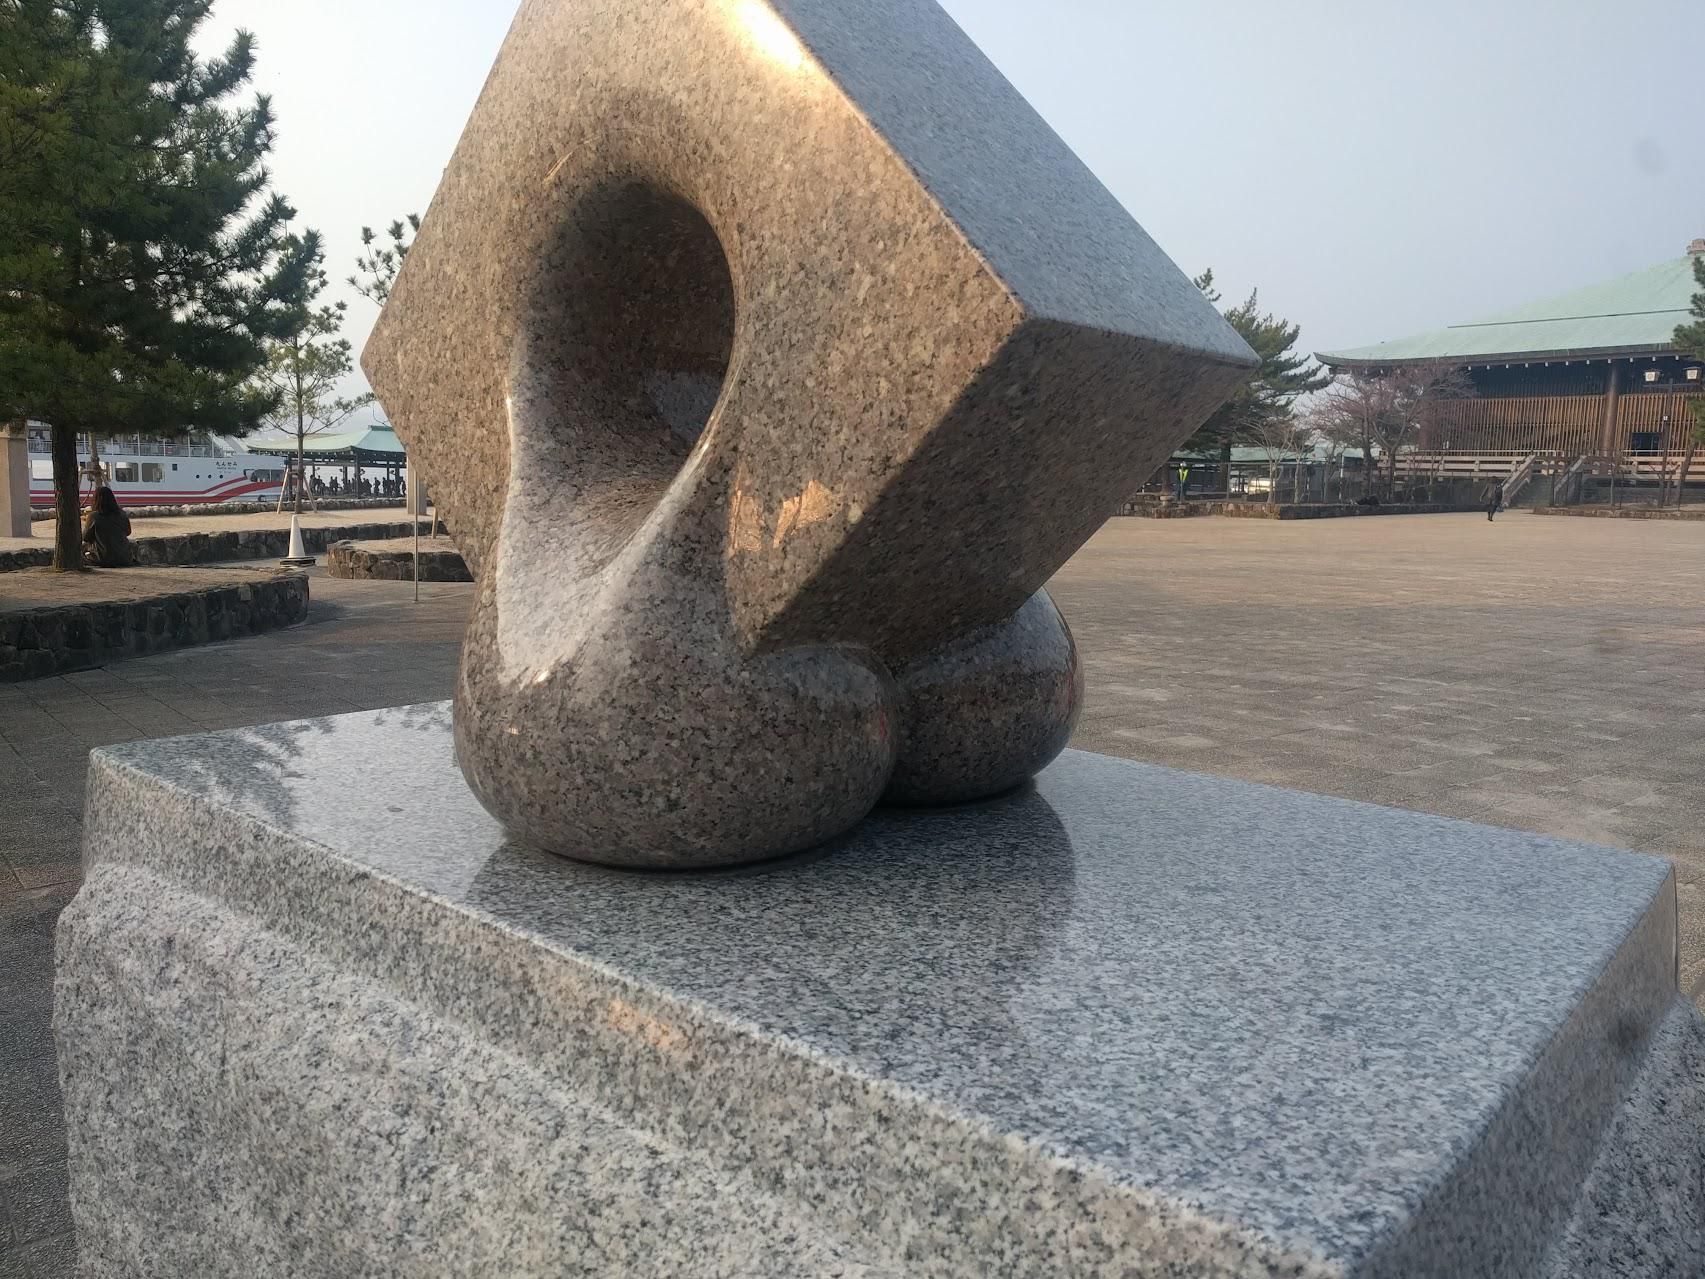 Oh, we're doing funny statues? Here's a statue of "nuts" at Miyajima in Japan